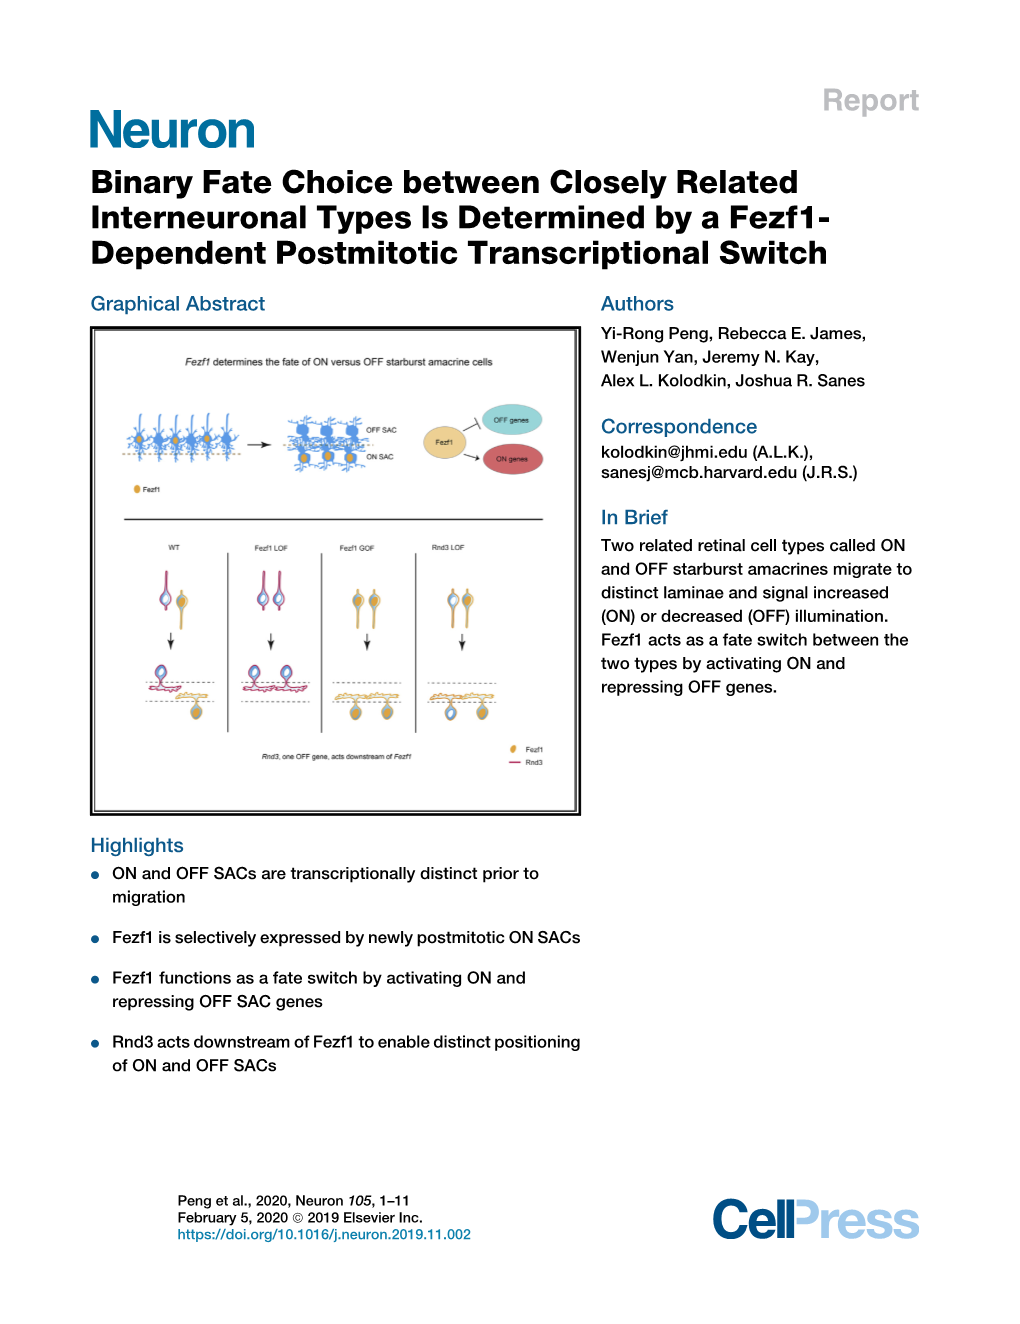 Binary Fate Choice Between Closely Related Interneuronal Types Is Determined by a Fezf1- Dependent Postmitotic Transcriptional Switch